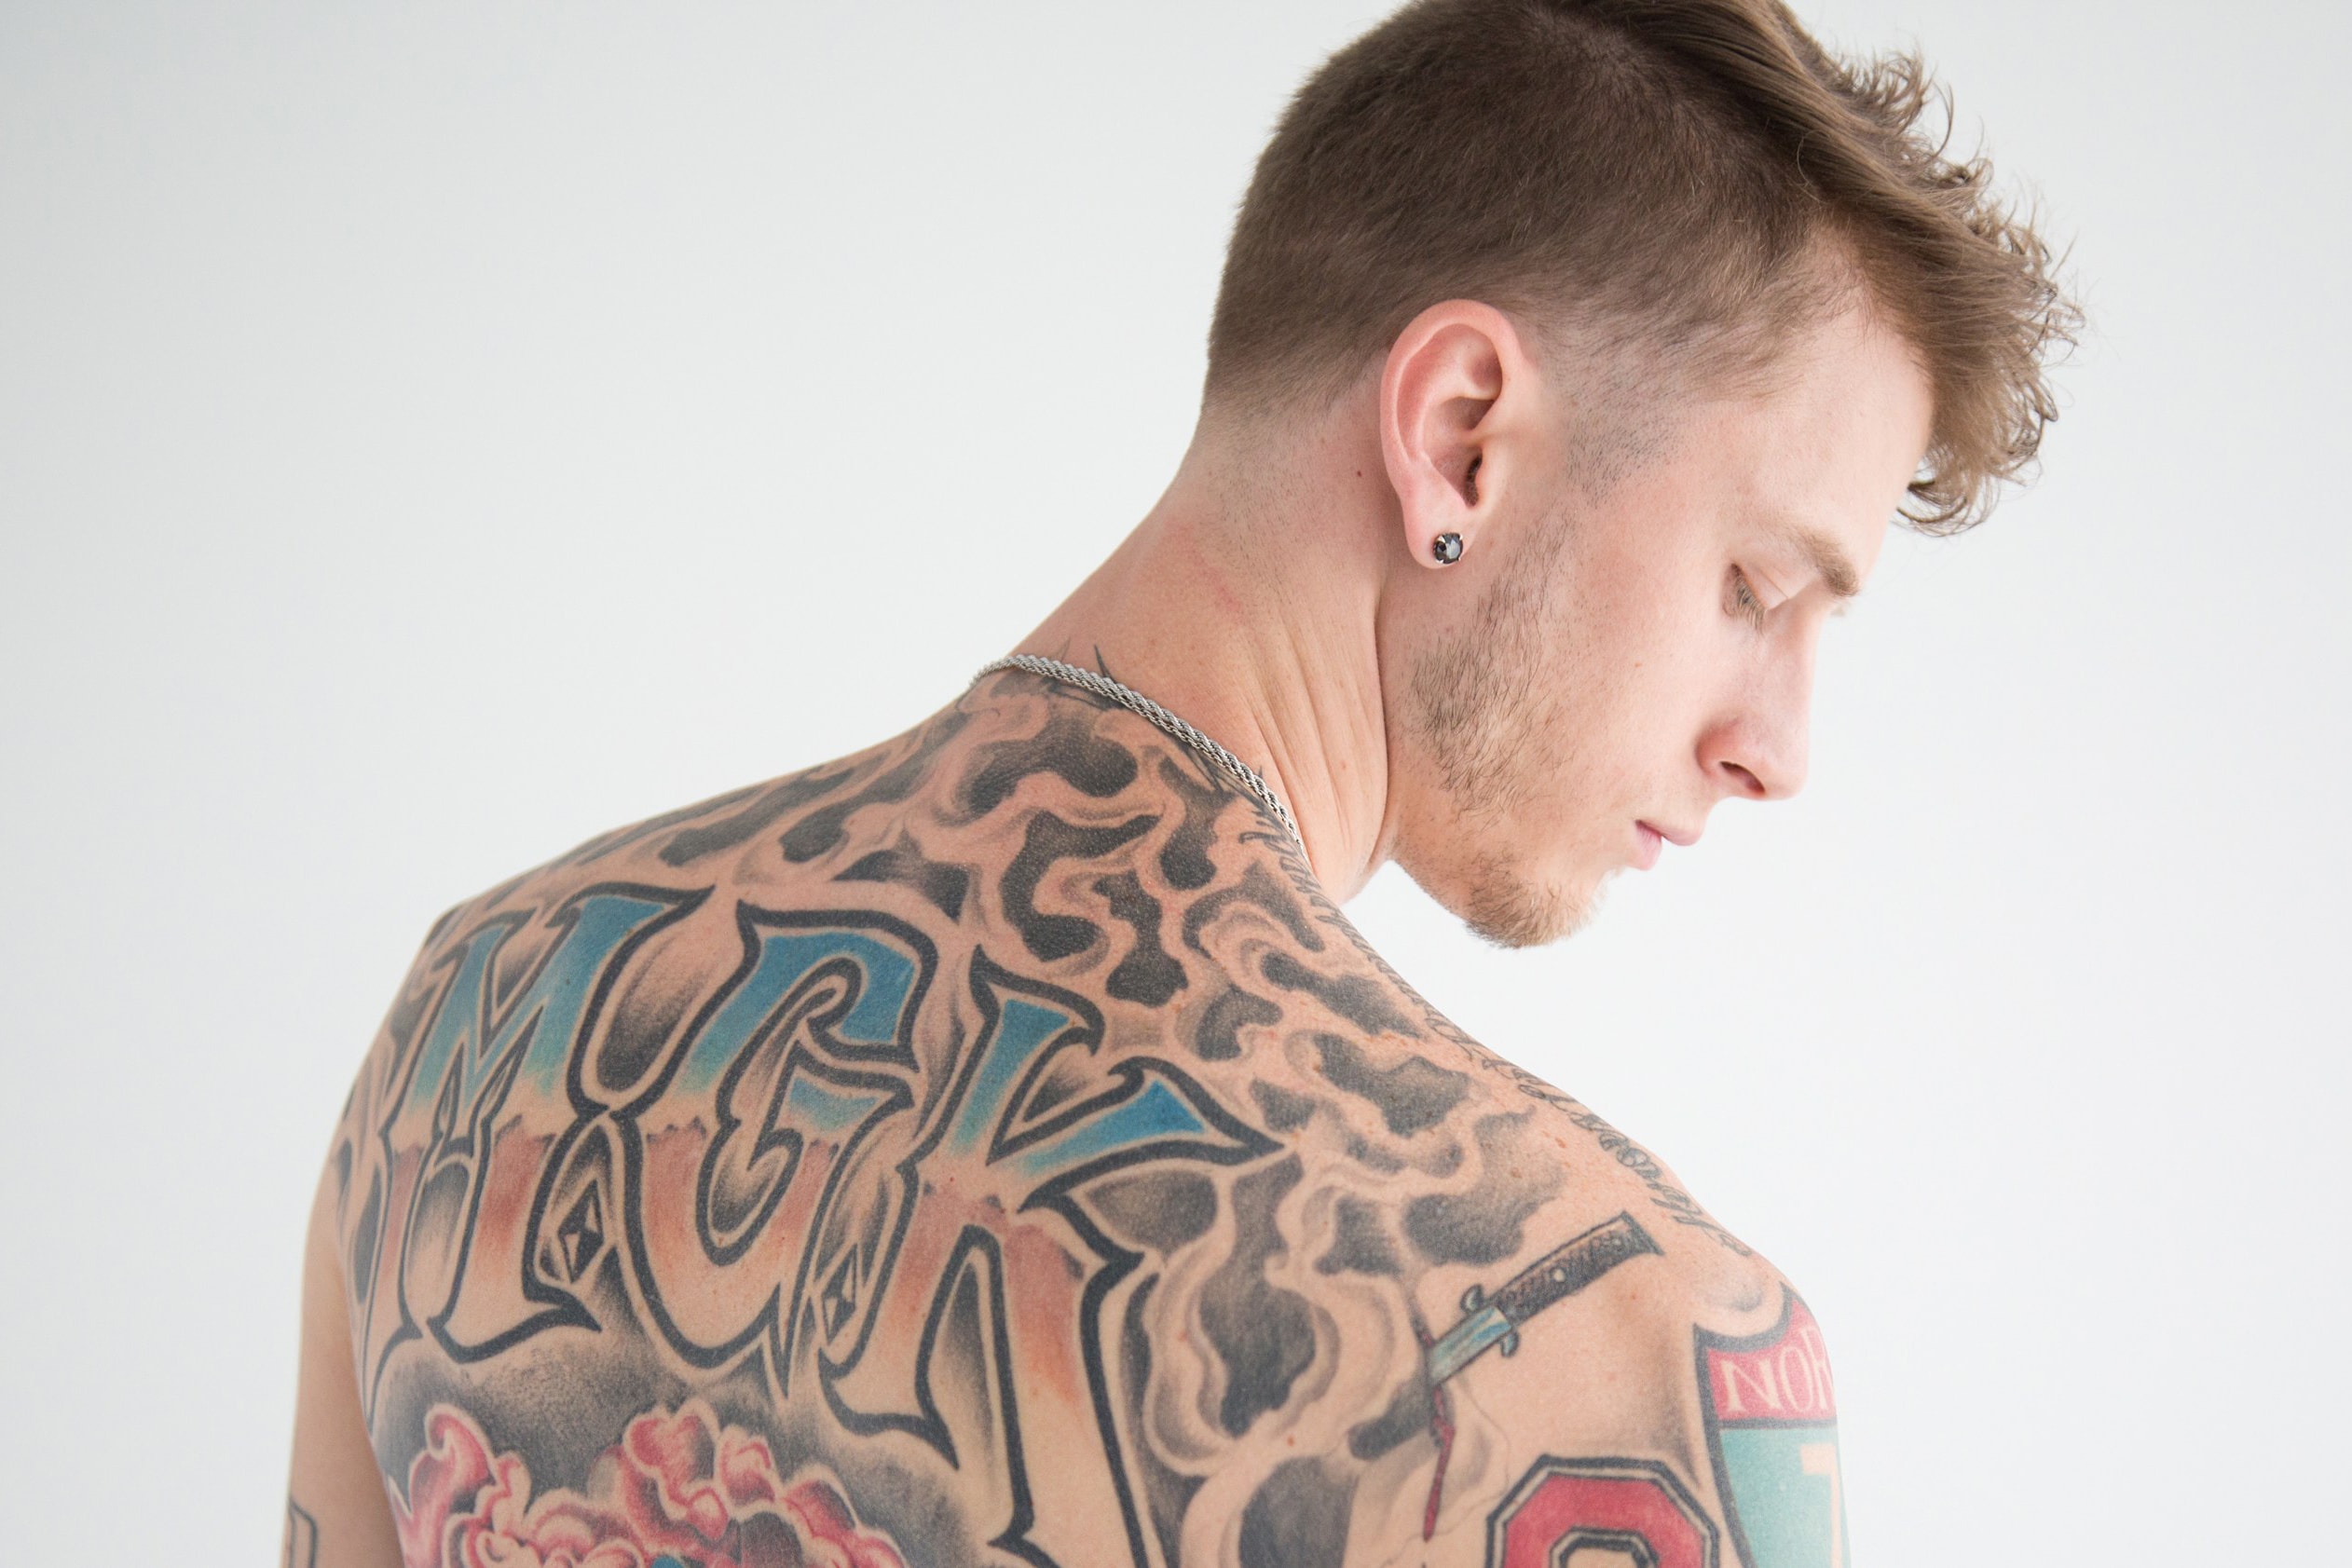 Reebok Classic Announces They’ve Signed Machine Gun Kelly